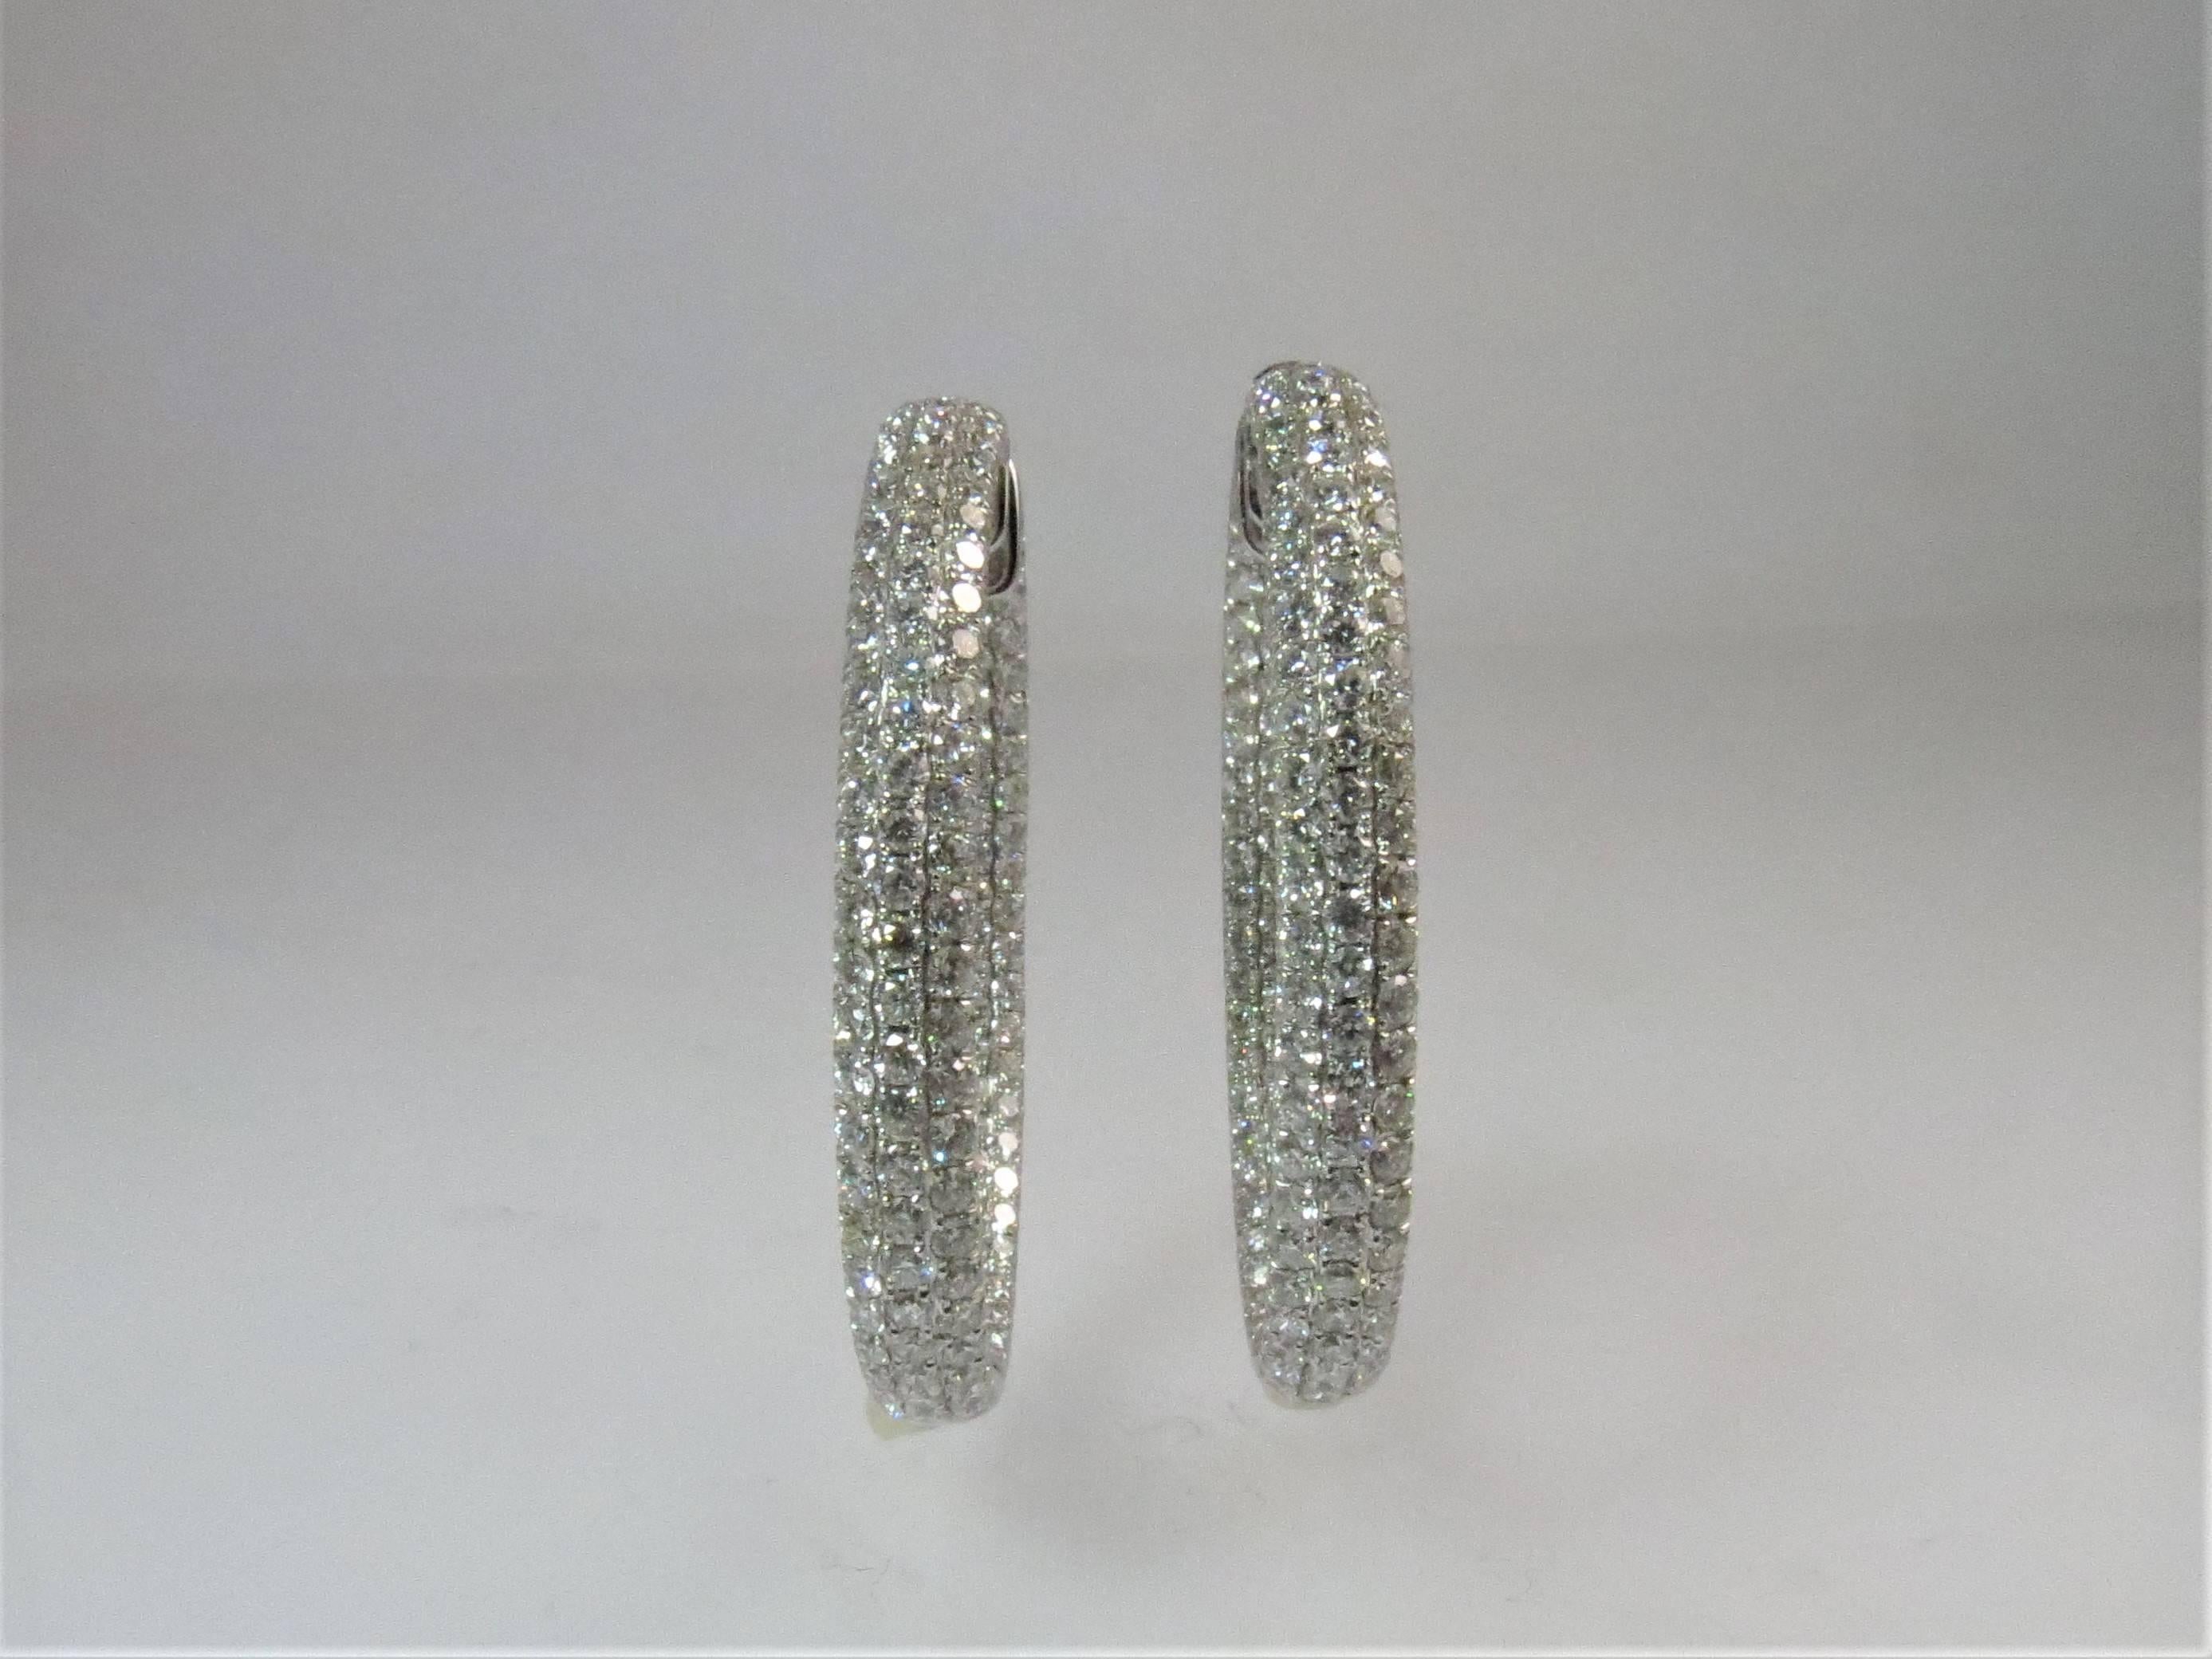 18K white gold oval shape hoop earrings, pave set with 300 full cut round diamonds weighing 8.30cts, G color, VS clarity